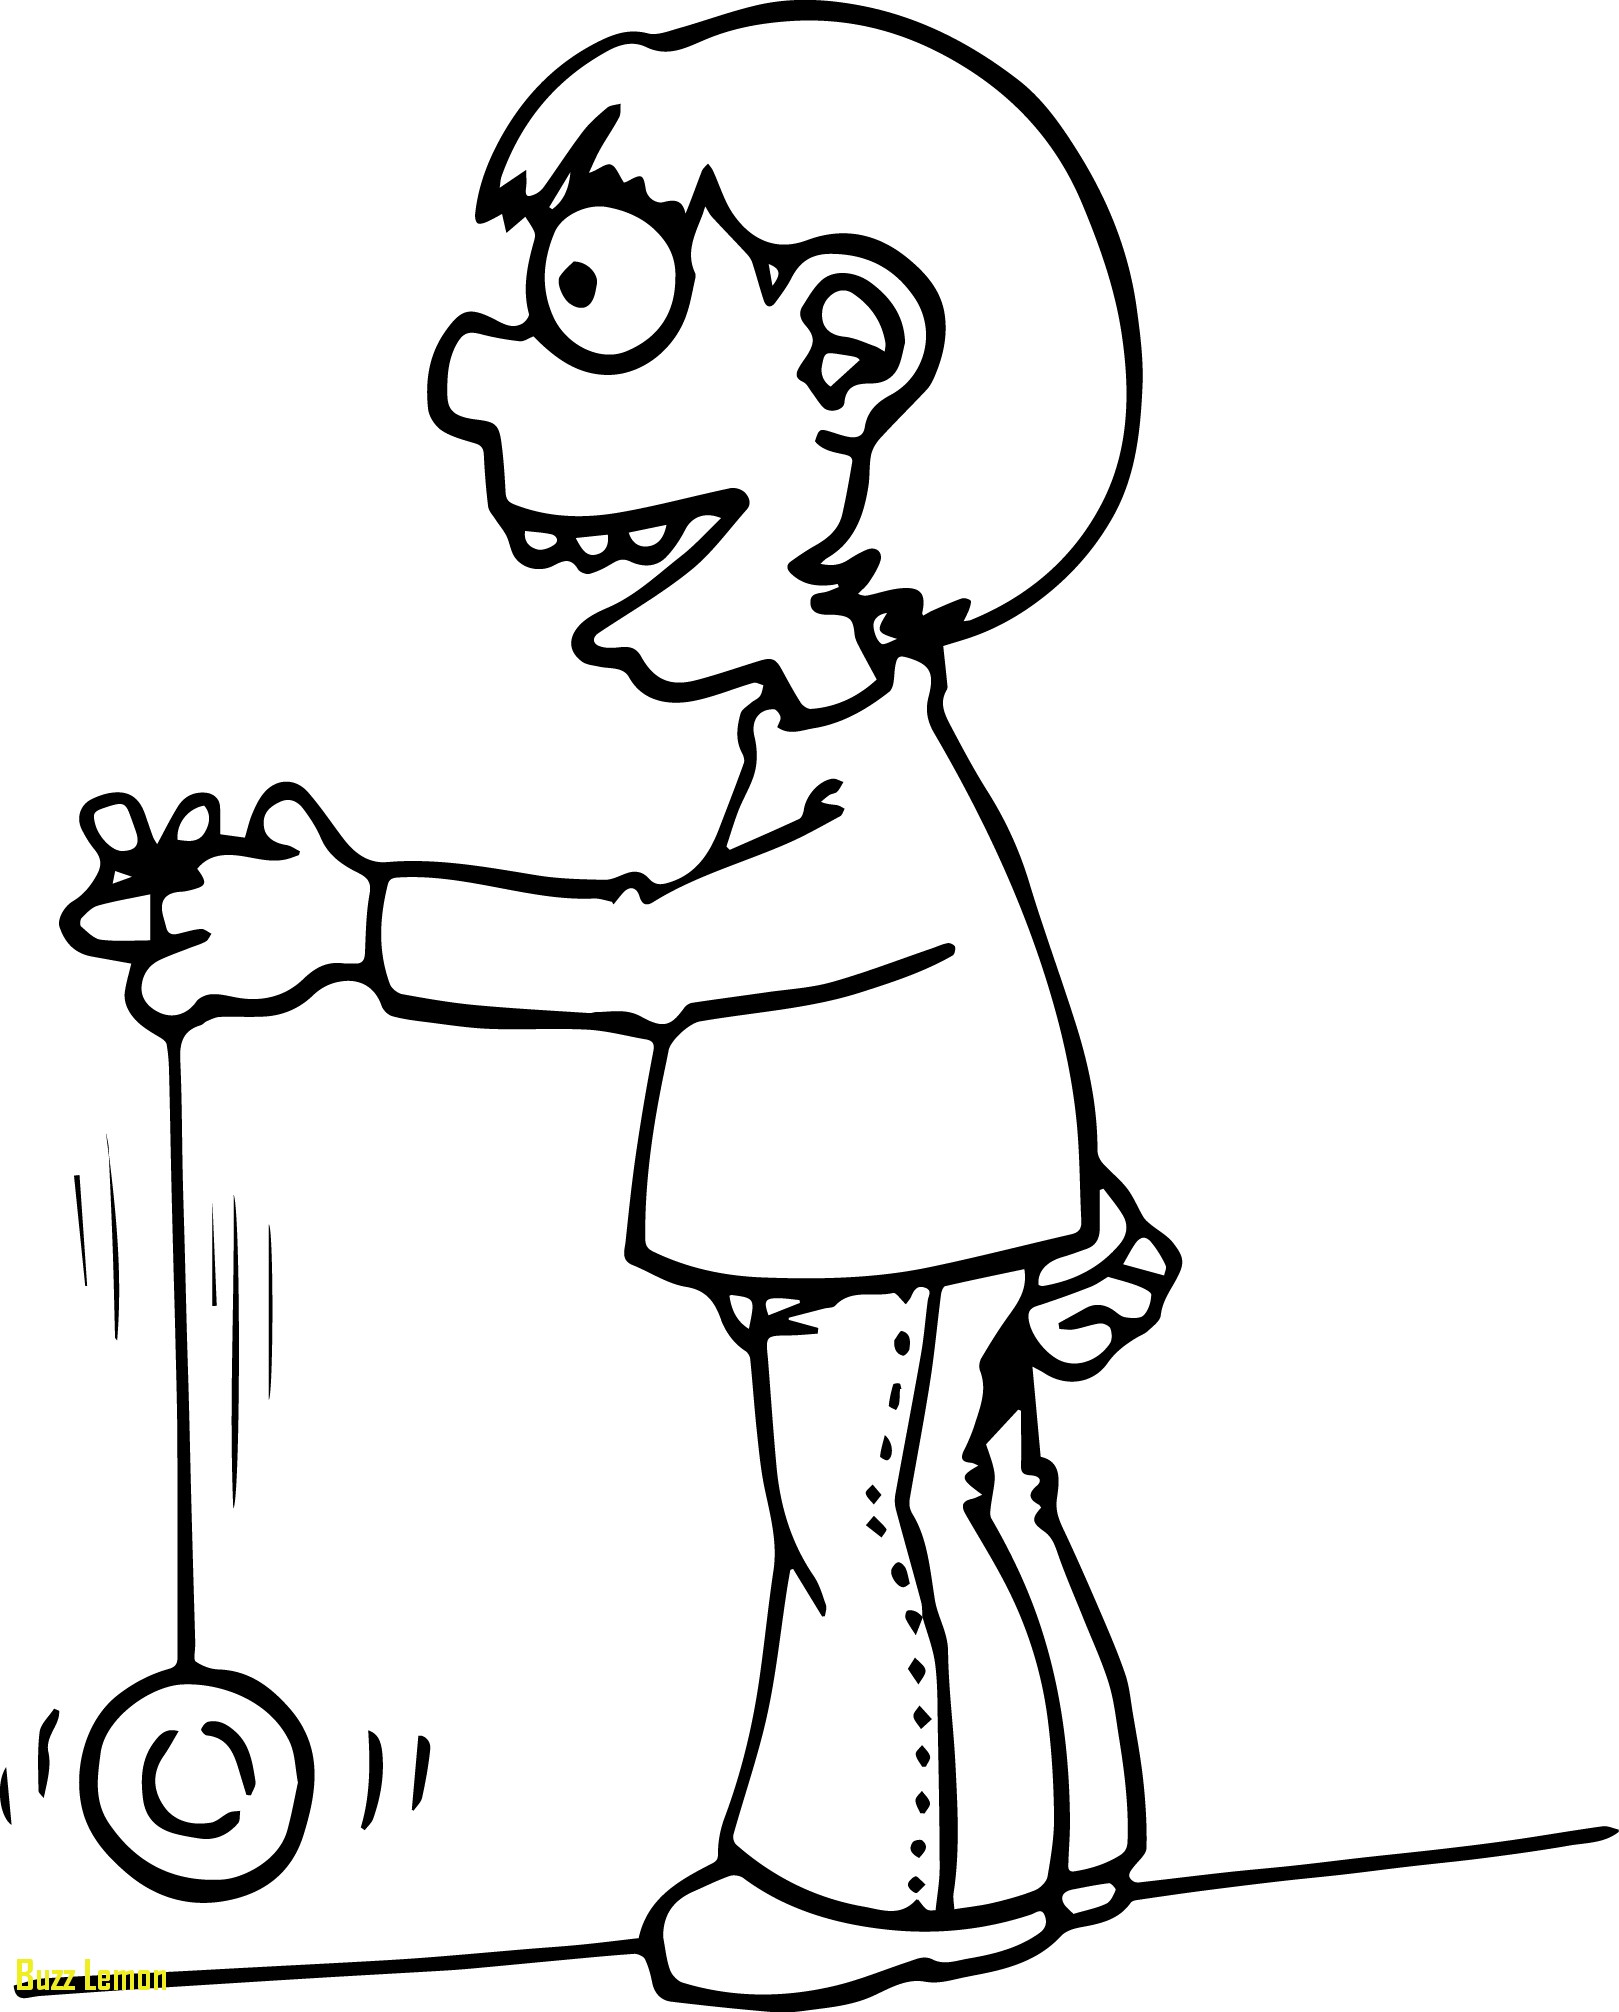 The best free Yoyo coloring page images. Download from 22 free ...